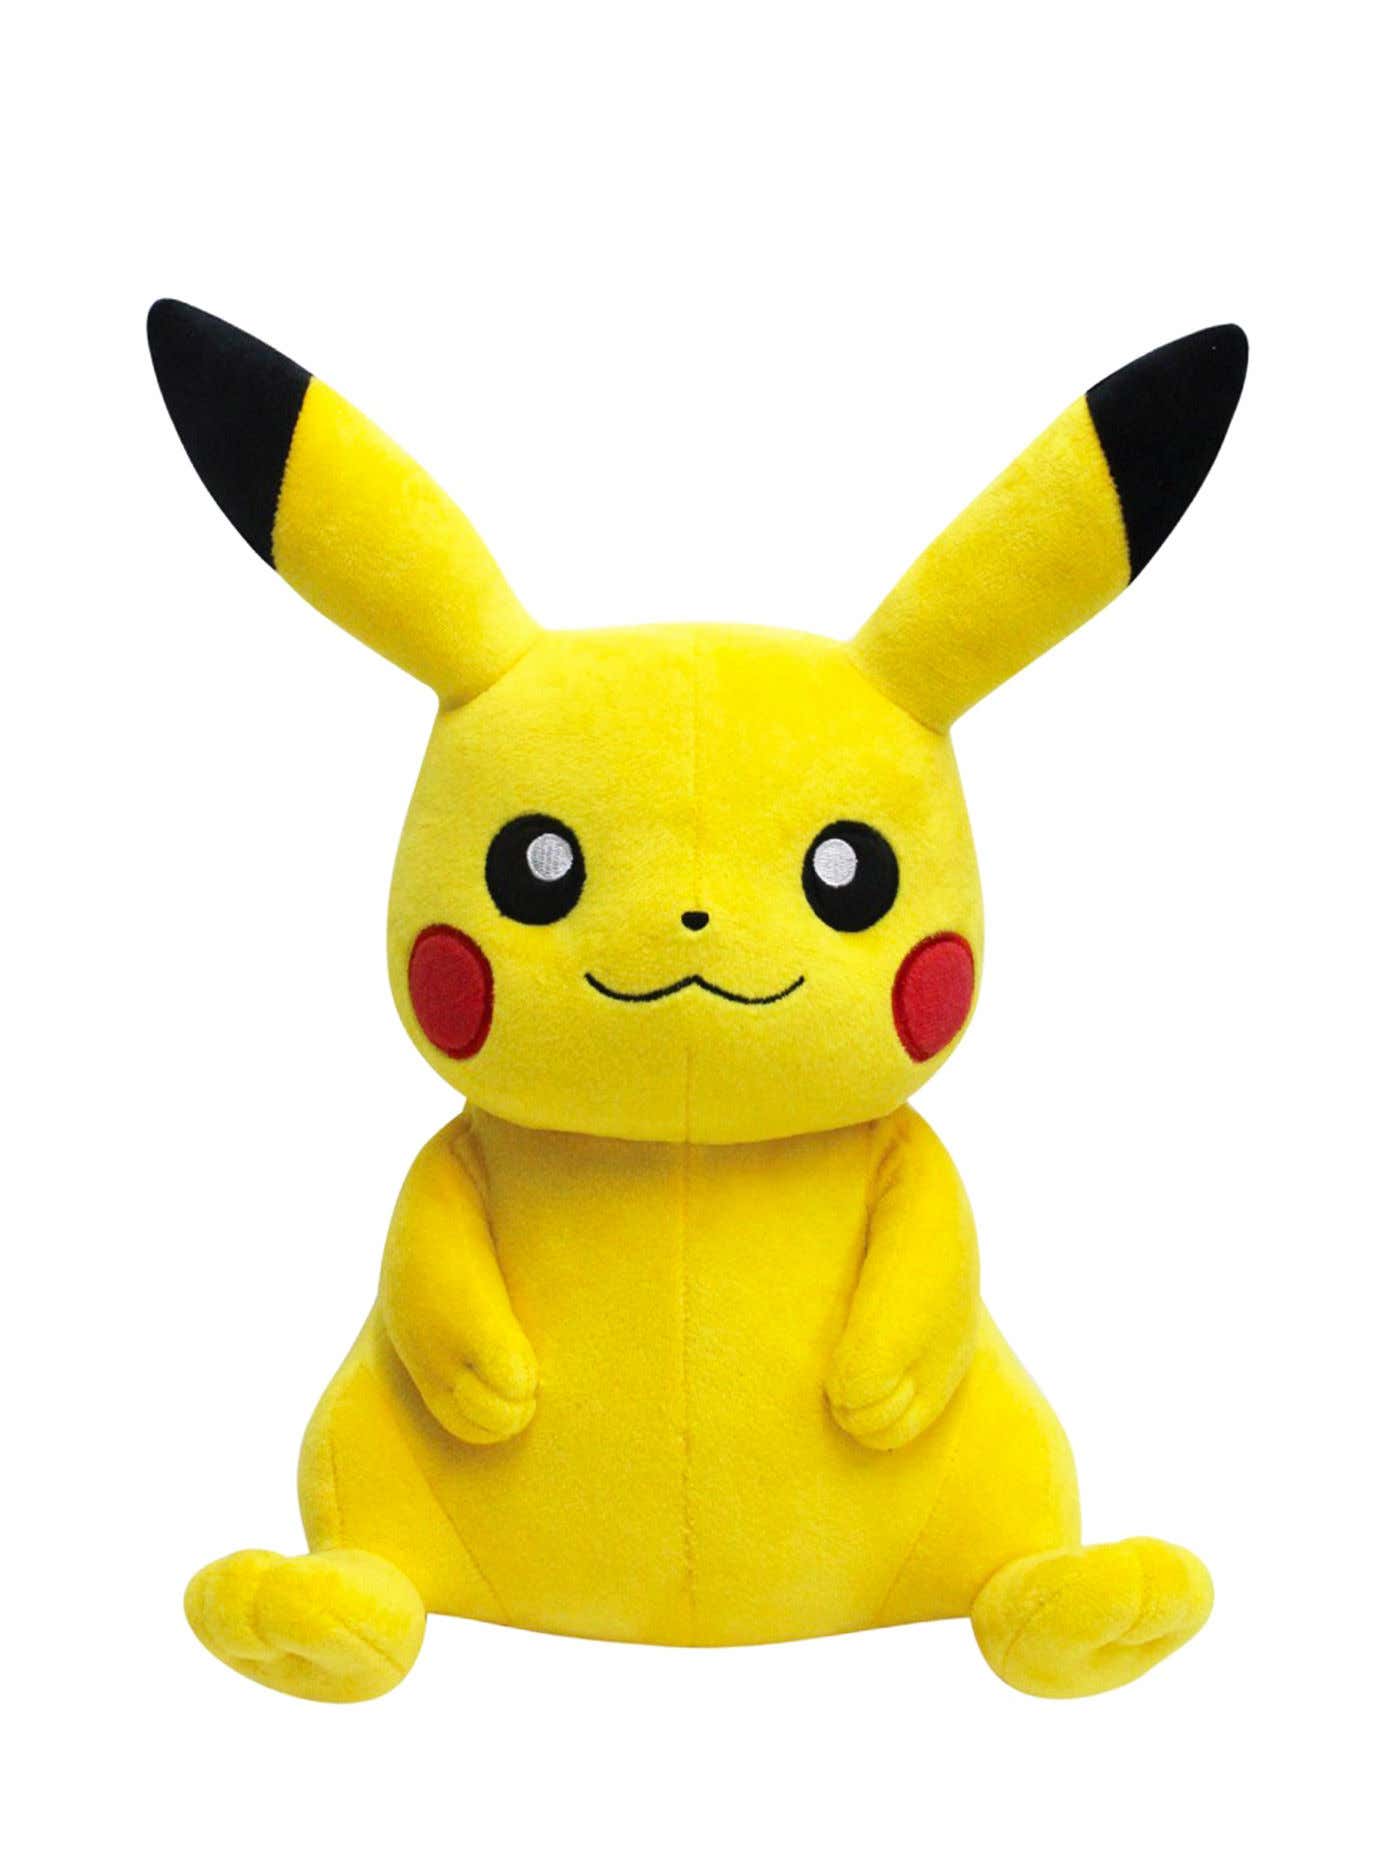  Pokémon 12 Large Pikachu Plush - Officially Licensed - Quality  & Soft Stuffed Animal Toy - Generation One - Great Gift for Kids, Boys,  Girls & Fans of Pokemon - 12 Inches : Toys & Games